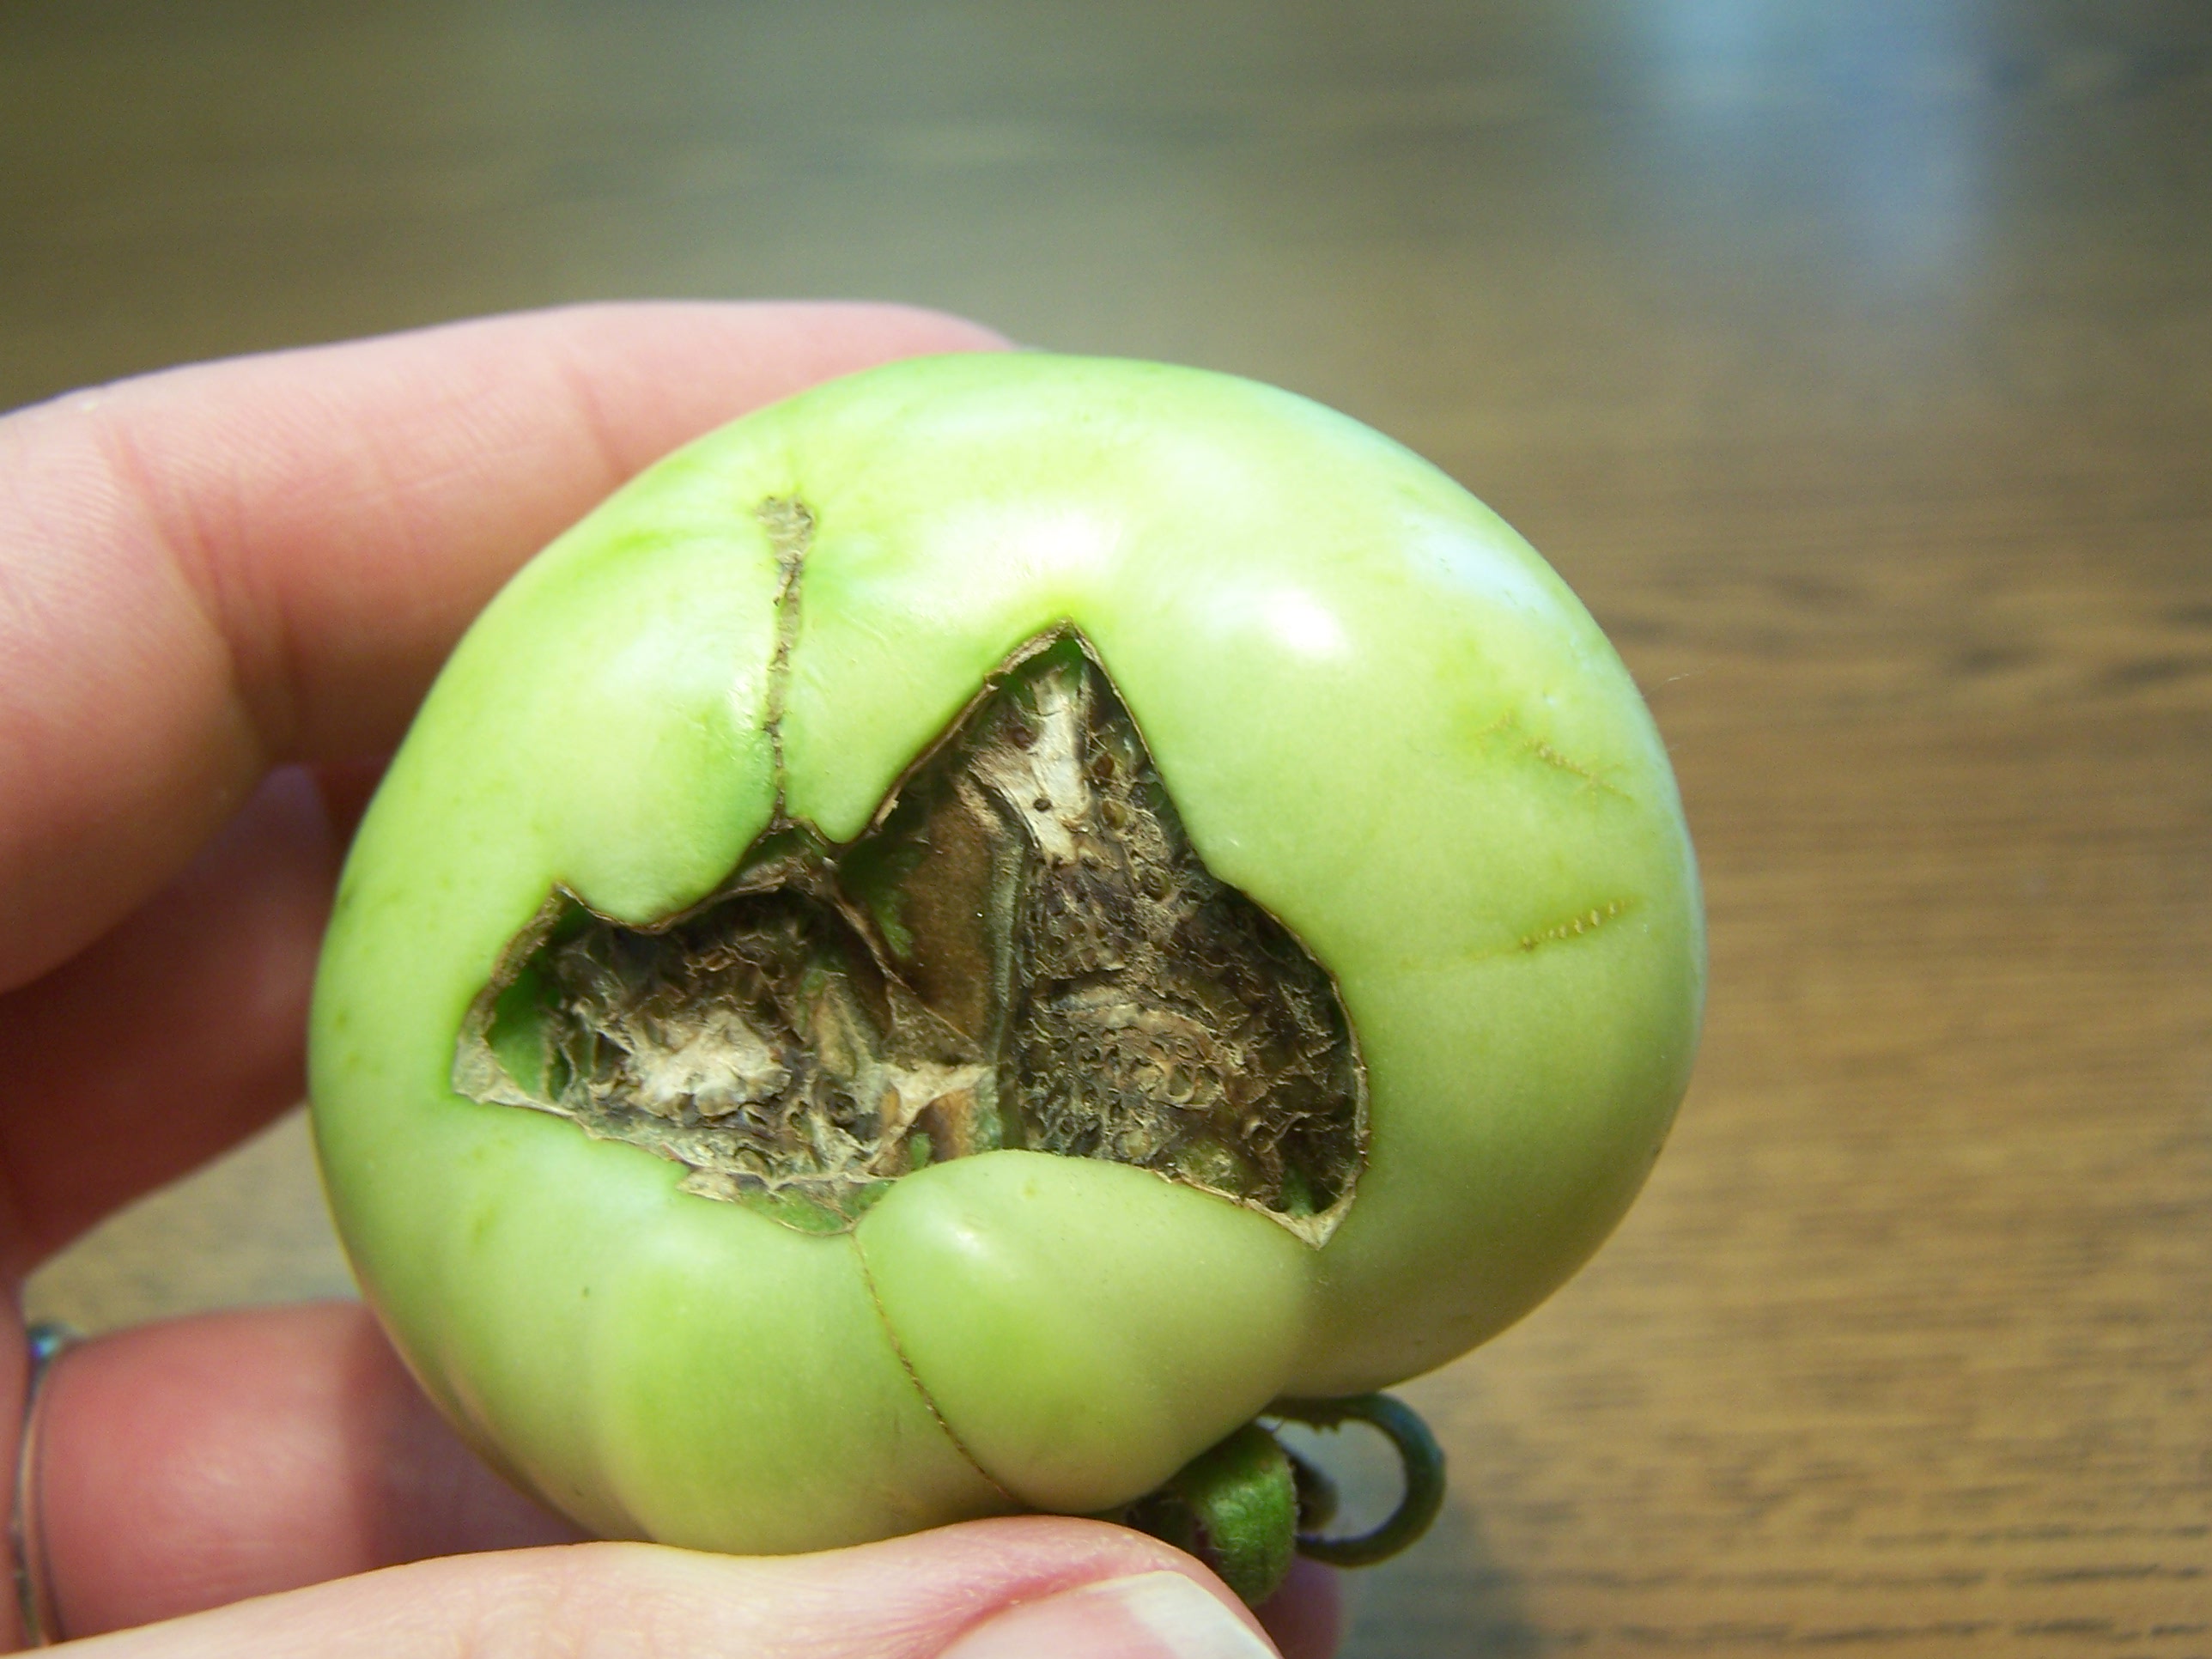 green tomato with a rotten spot showing blossom end rot